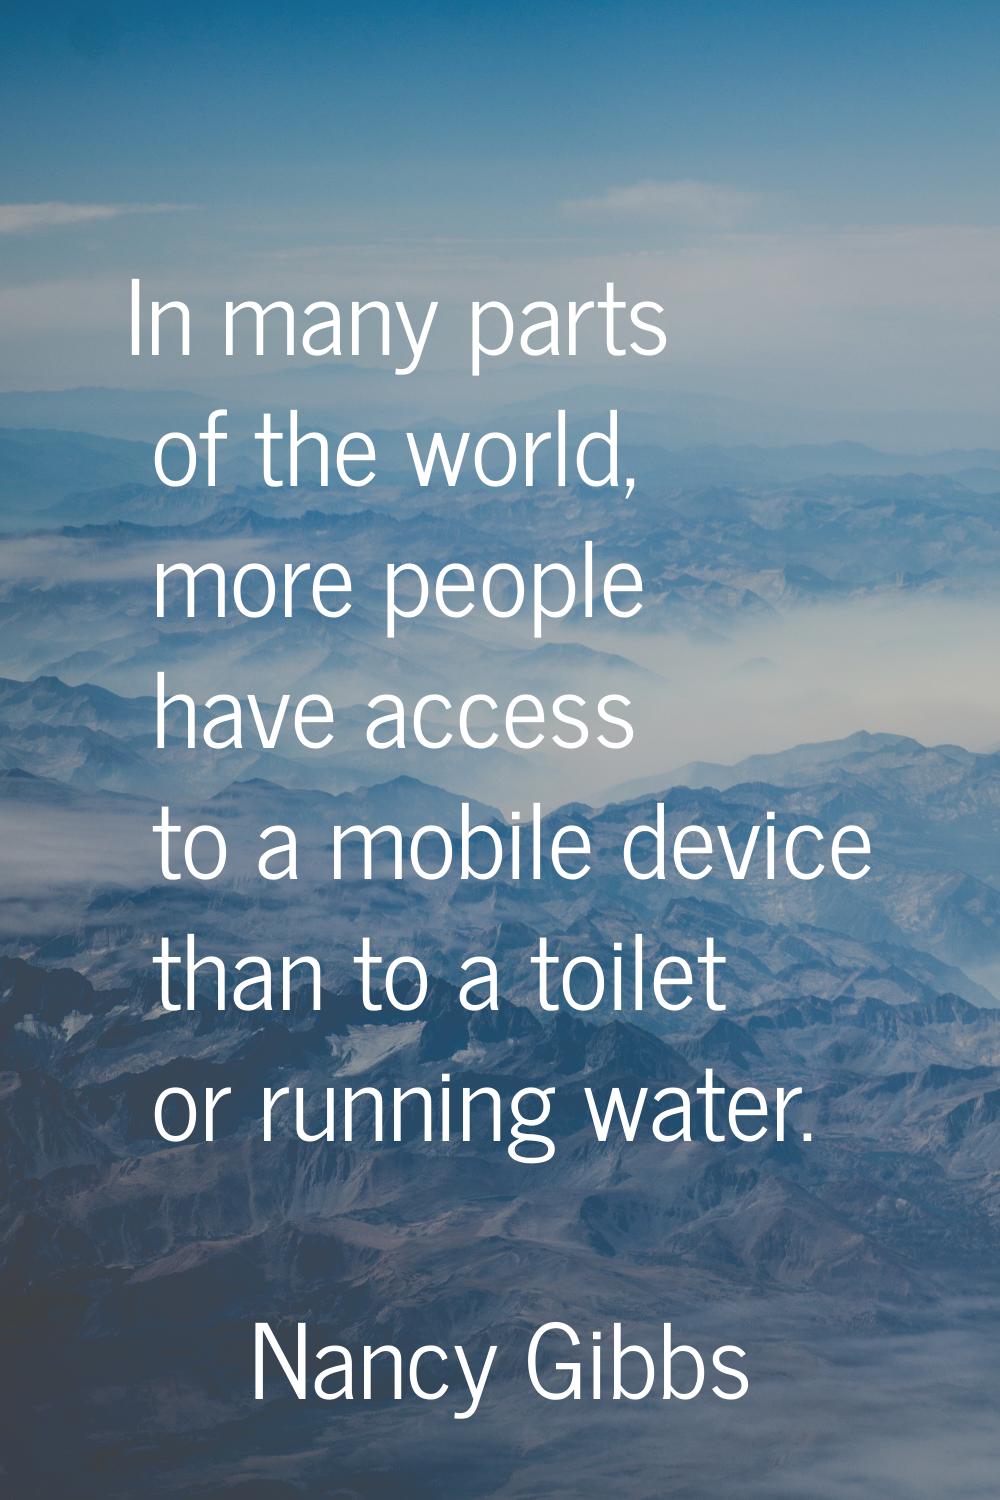 In many parts of the world, more people have access to a mobile device than to a toilet or running 